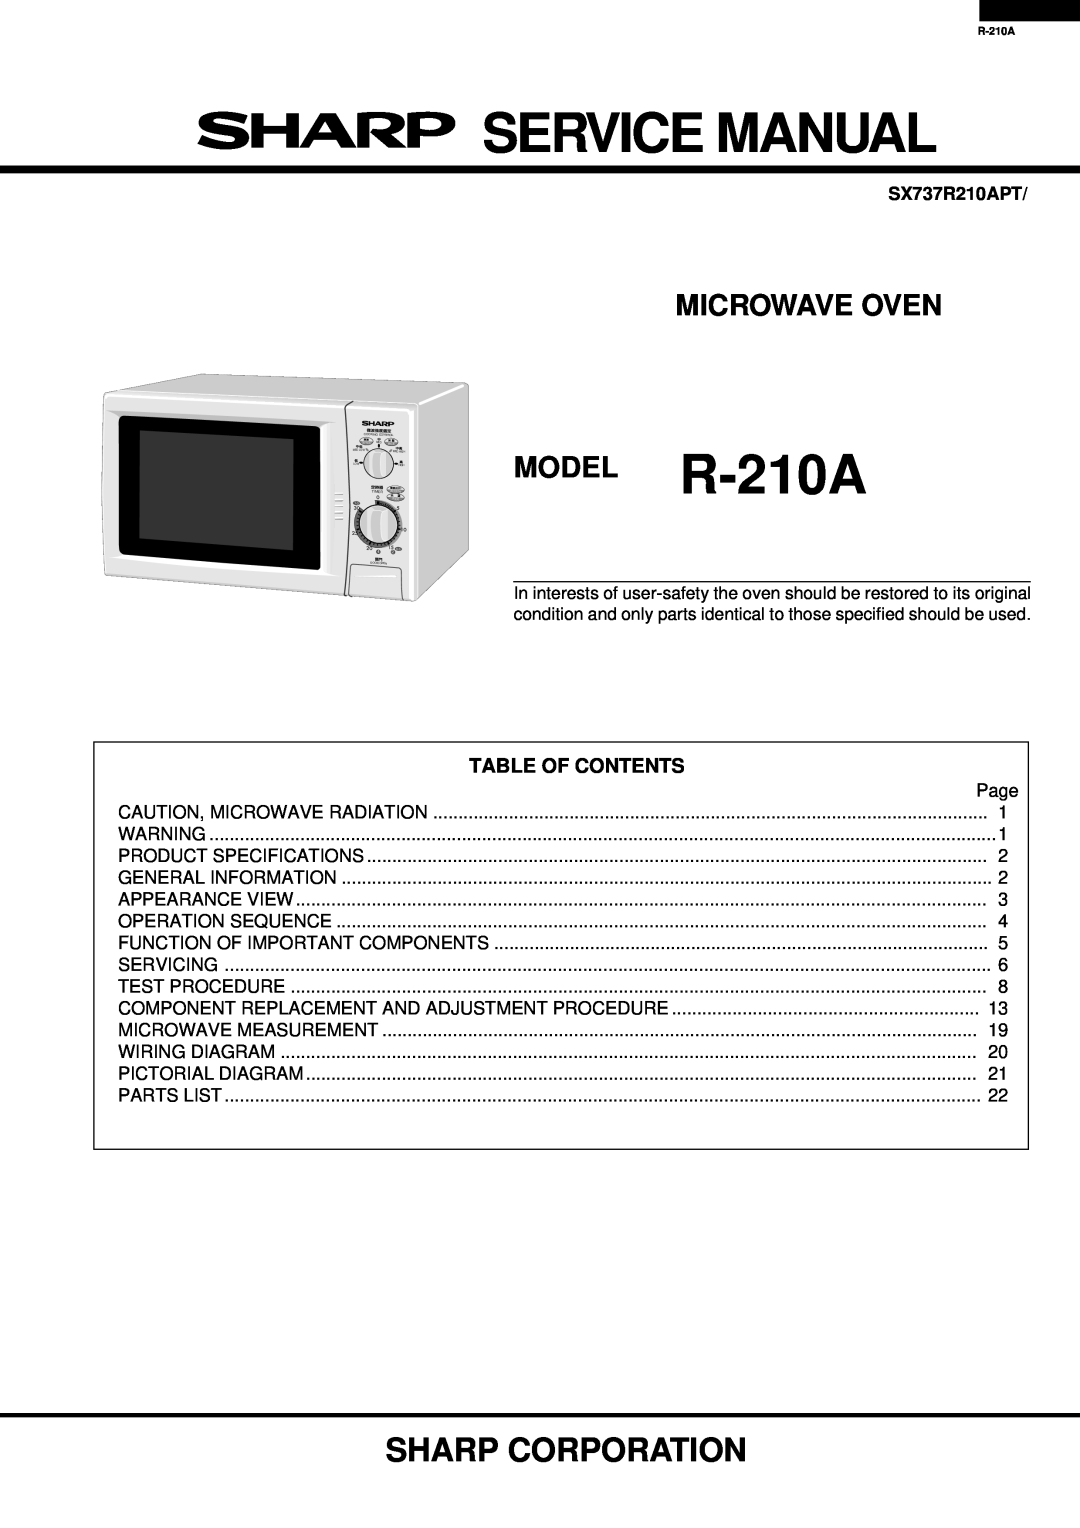 Sharp specifications Sharp Corporation, Microwave Oven, MODEL R-210A, Table Of Contents, SX737R210APT 